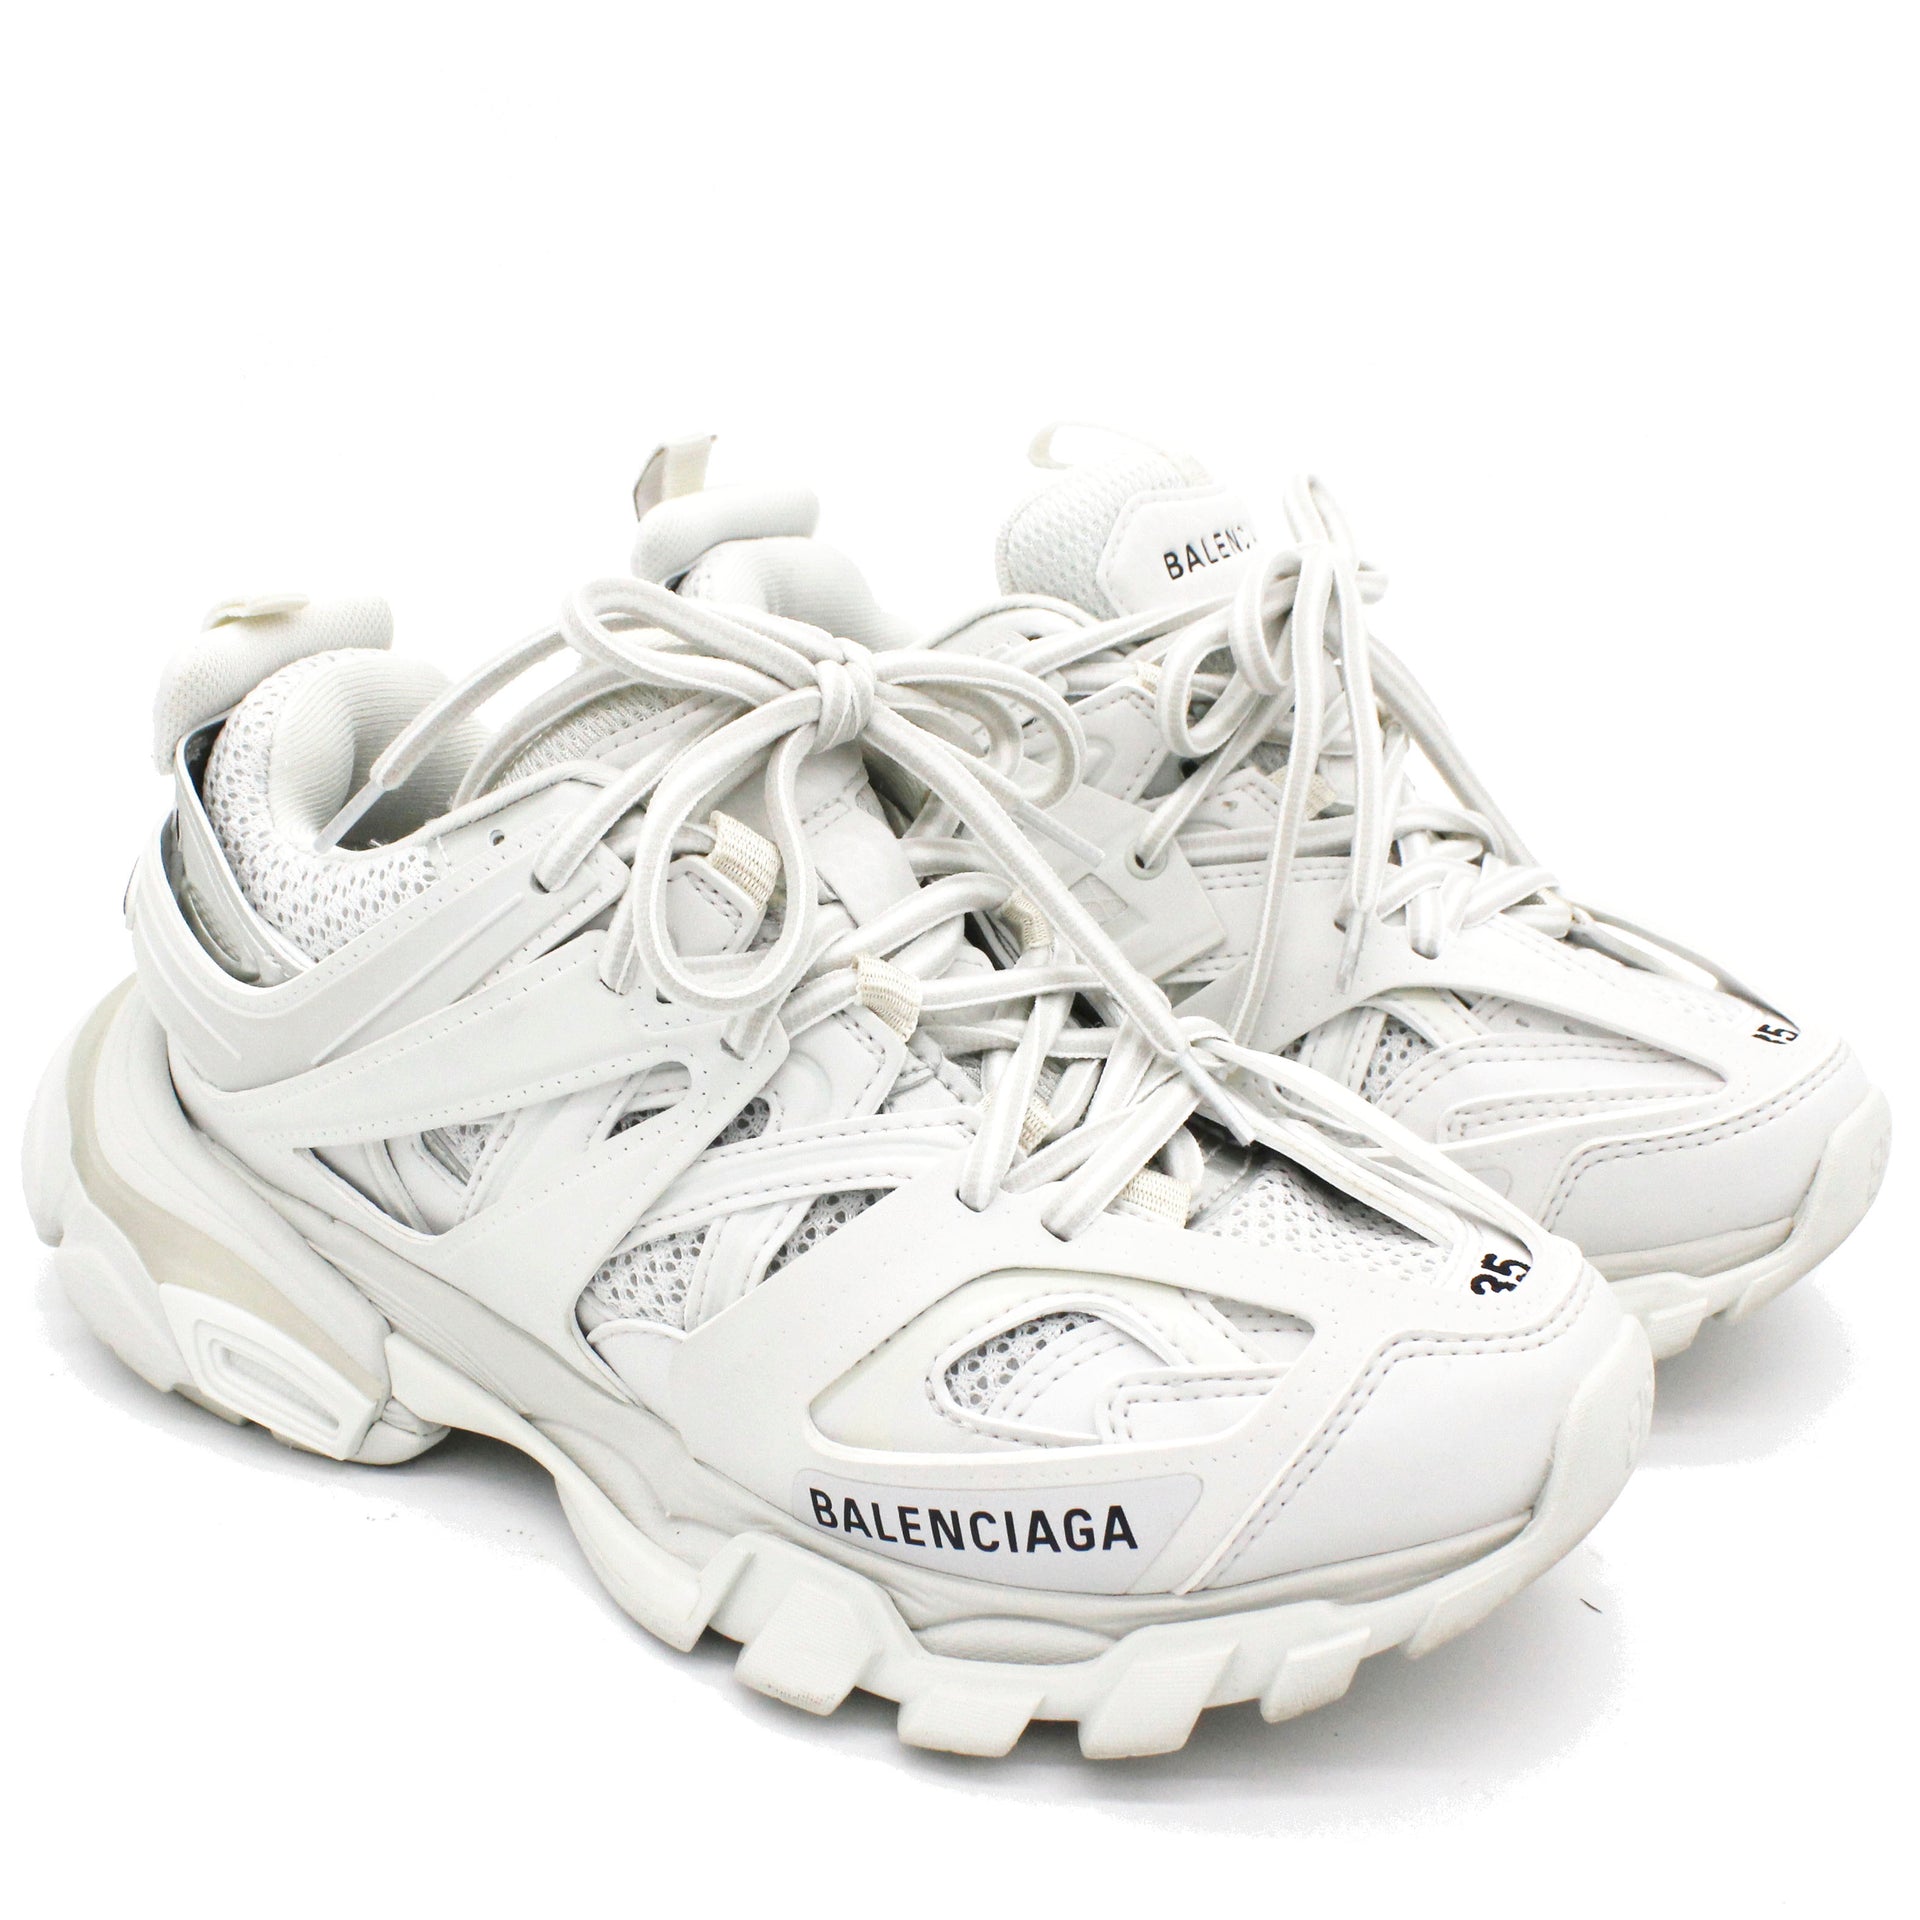 Track sneakers White